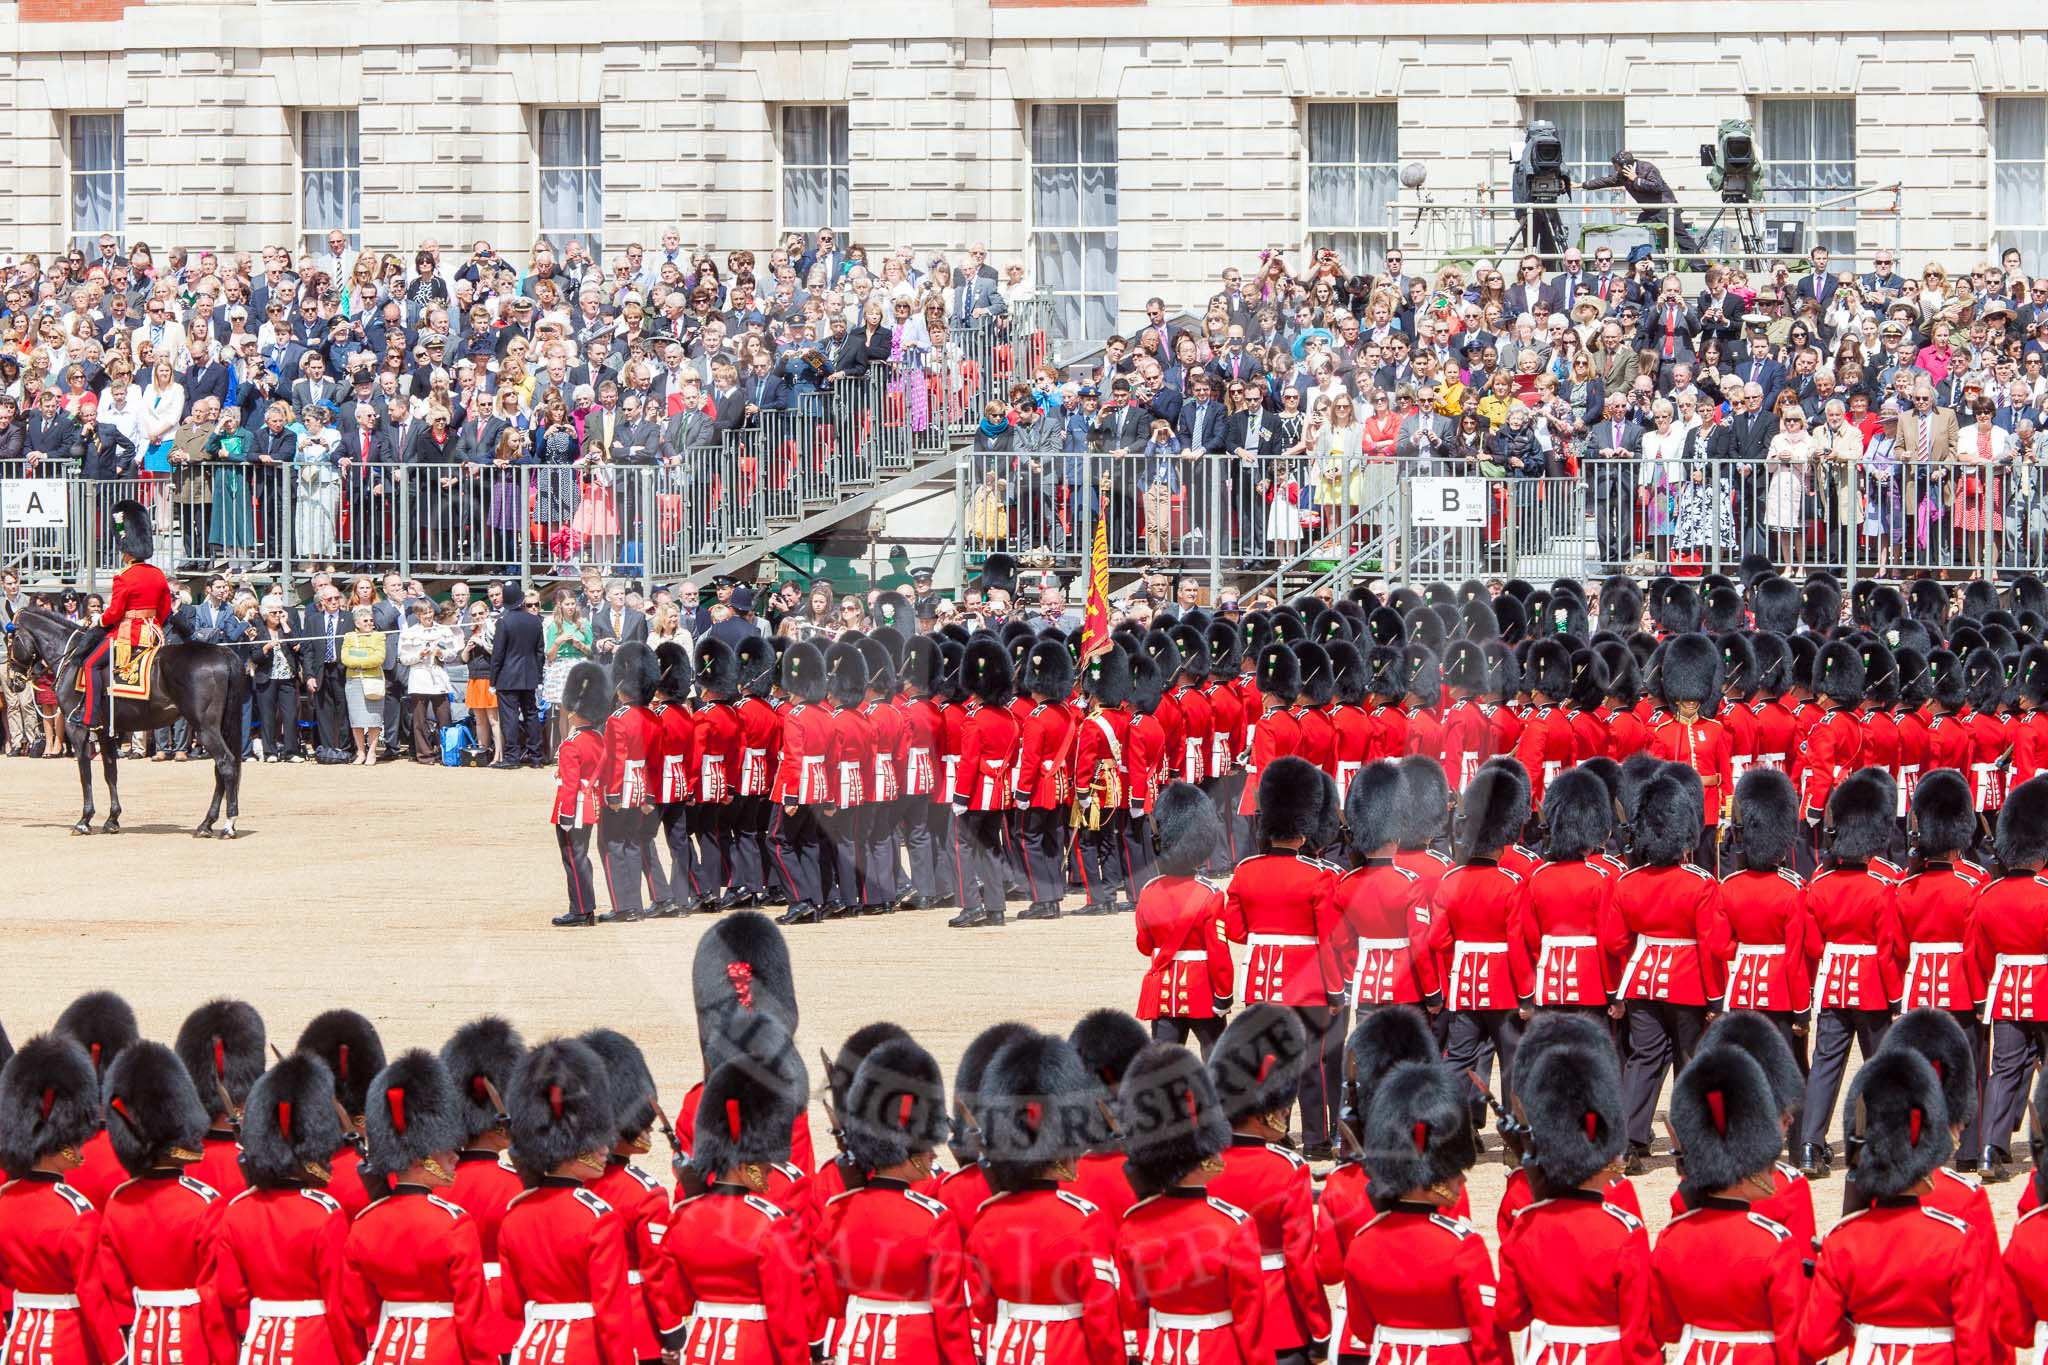 Trooping the Colour 2013: The guards change directions in the corners of Horse Guards Parade not by marching around the corner, but by forming new lines of guardsmen at a right angle to the previous direction. Image #557, 15 June 2013 11:39 Horse Guards Parade, London, UK